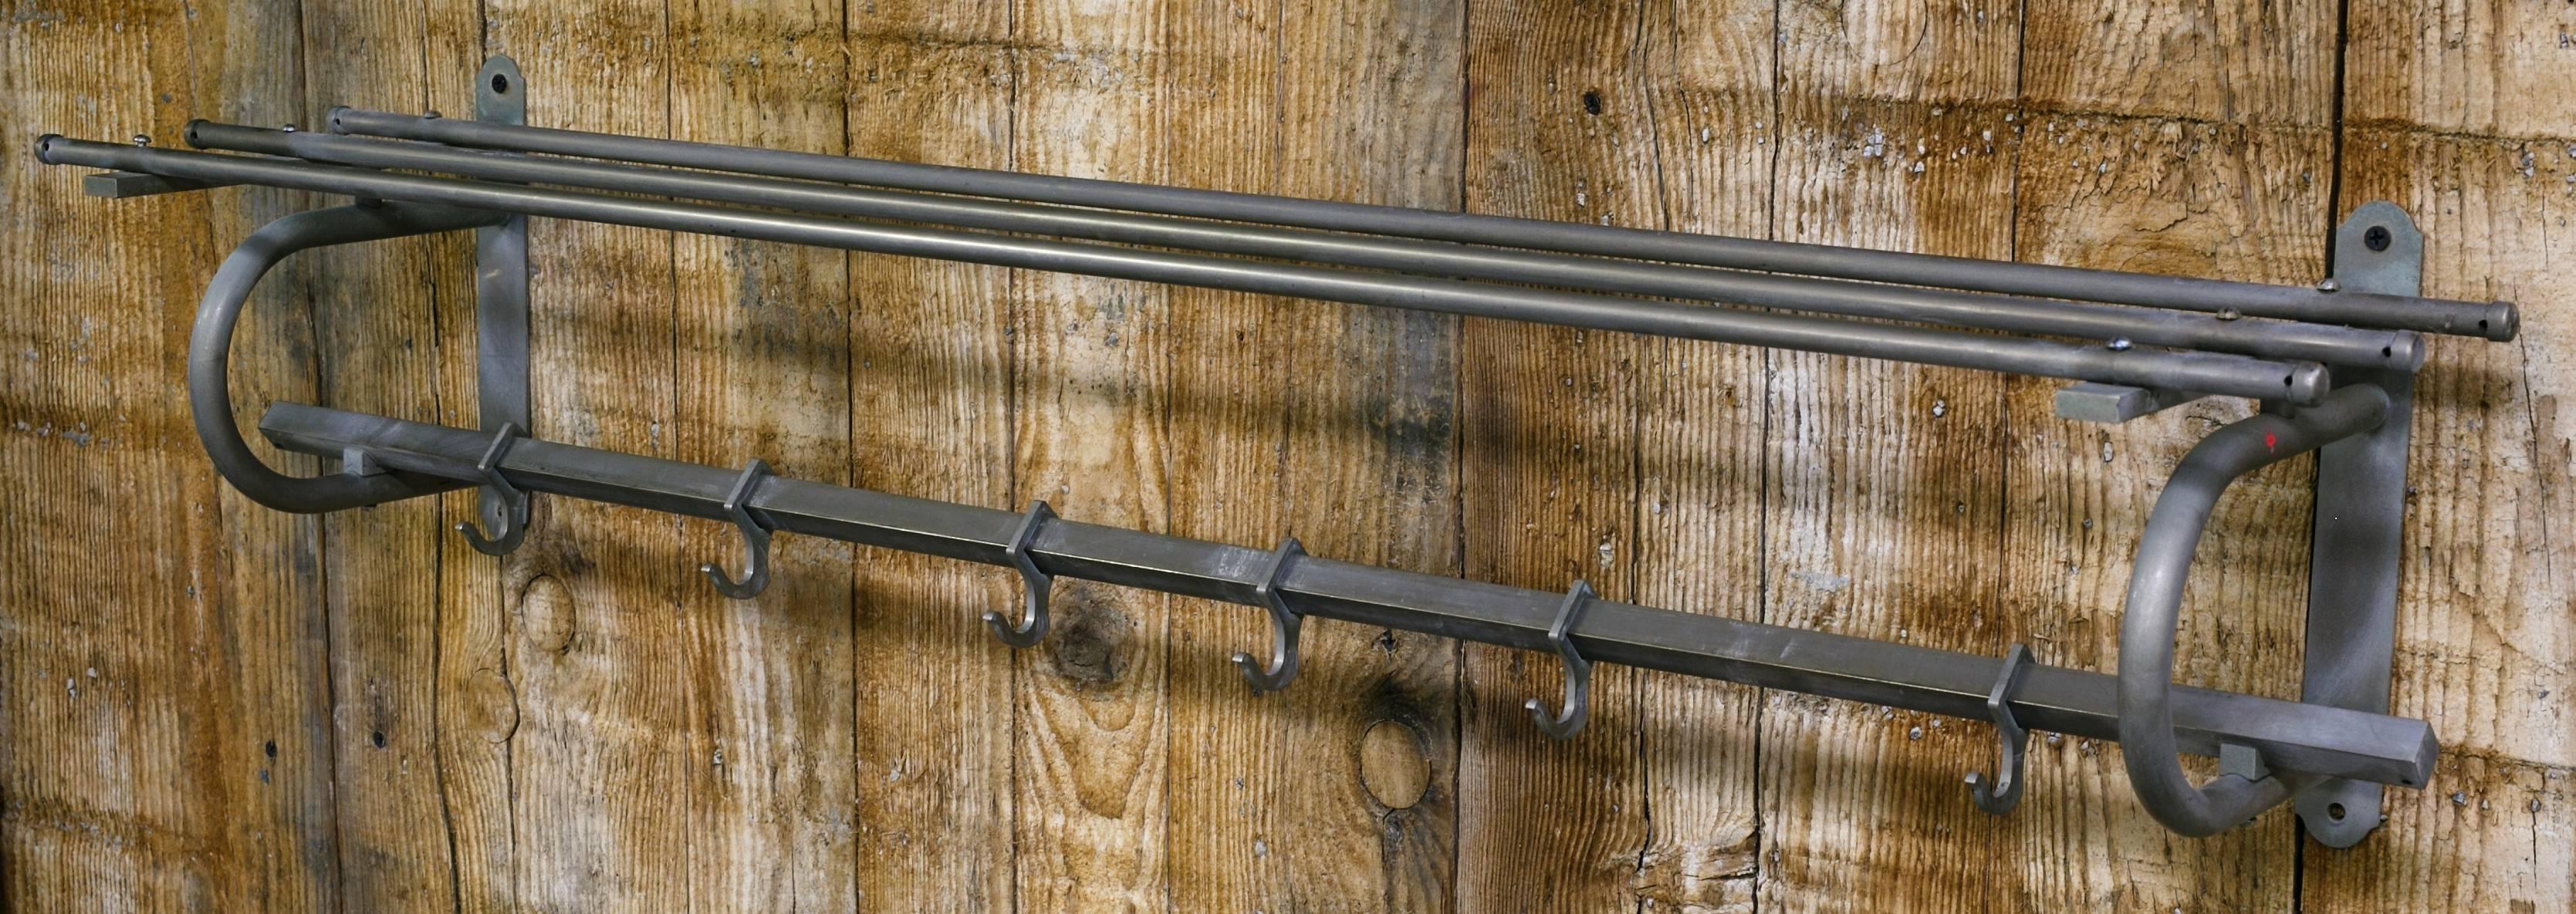 This vintage rack has 6 hooks in addition to the shelf.
It is nickel plate over brass. It has developed a nice patina.